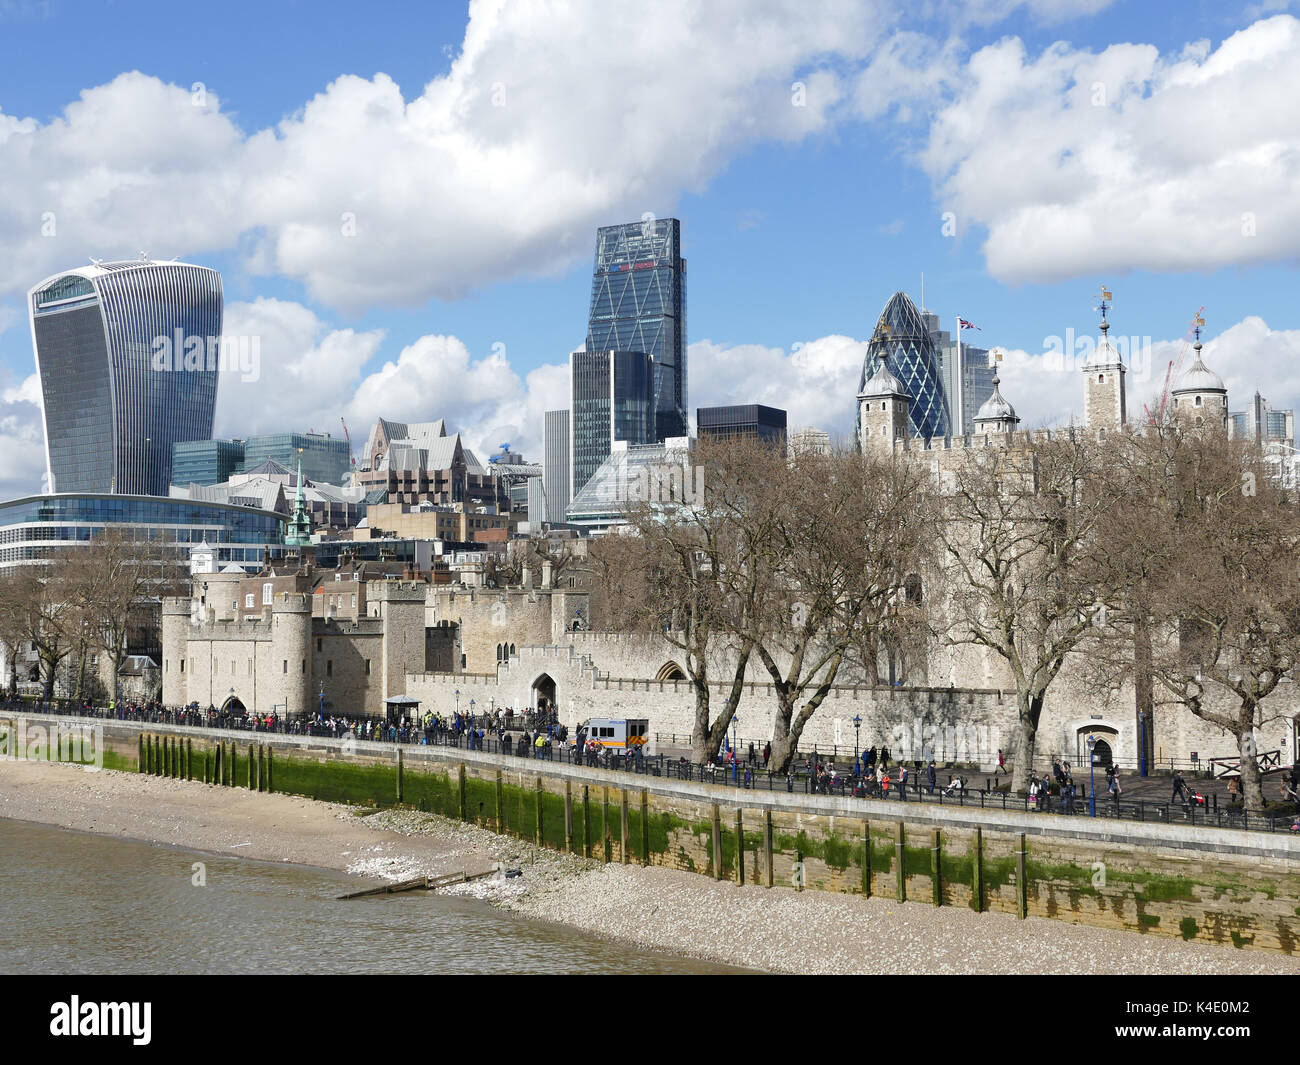 London City Skyline With Thames River And The Tower Of London, England Stock Photo